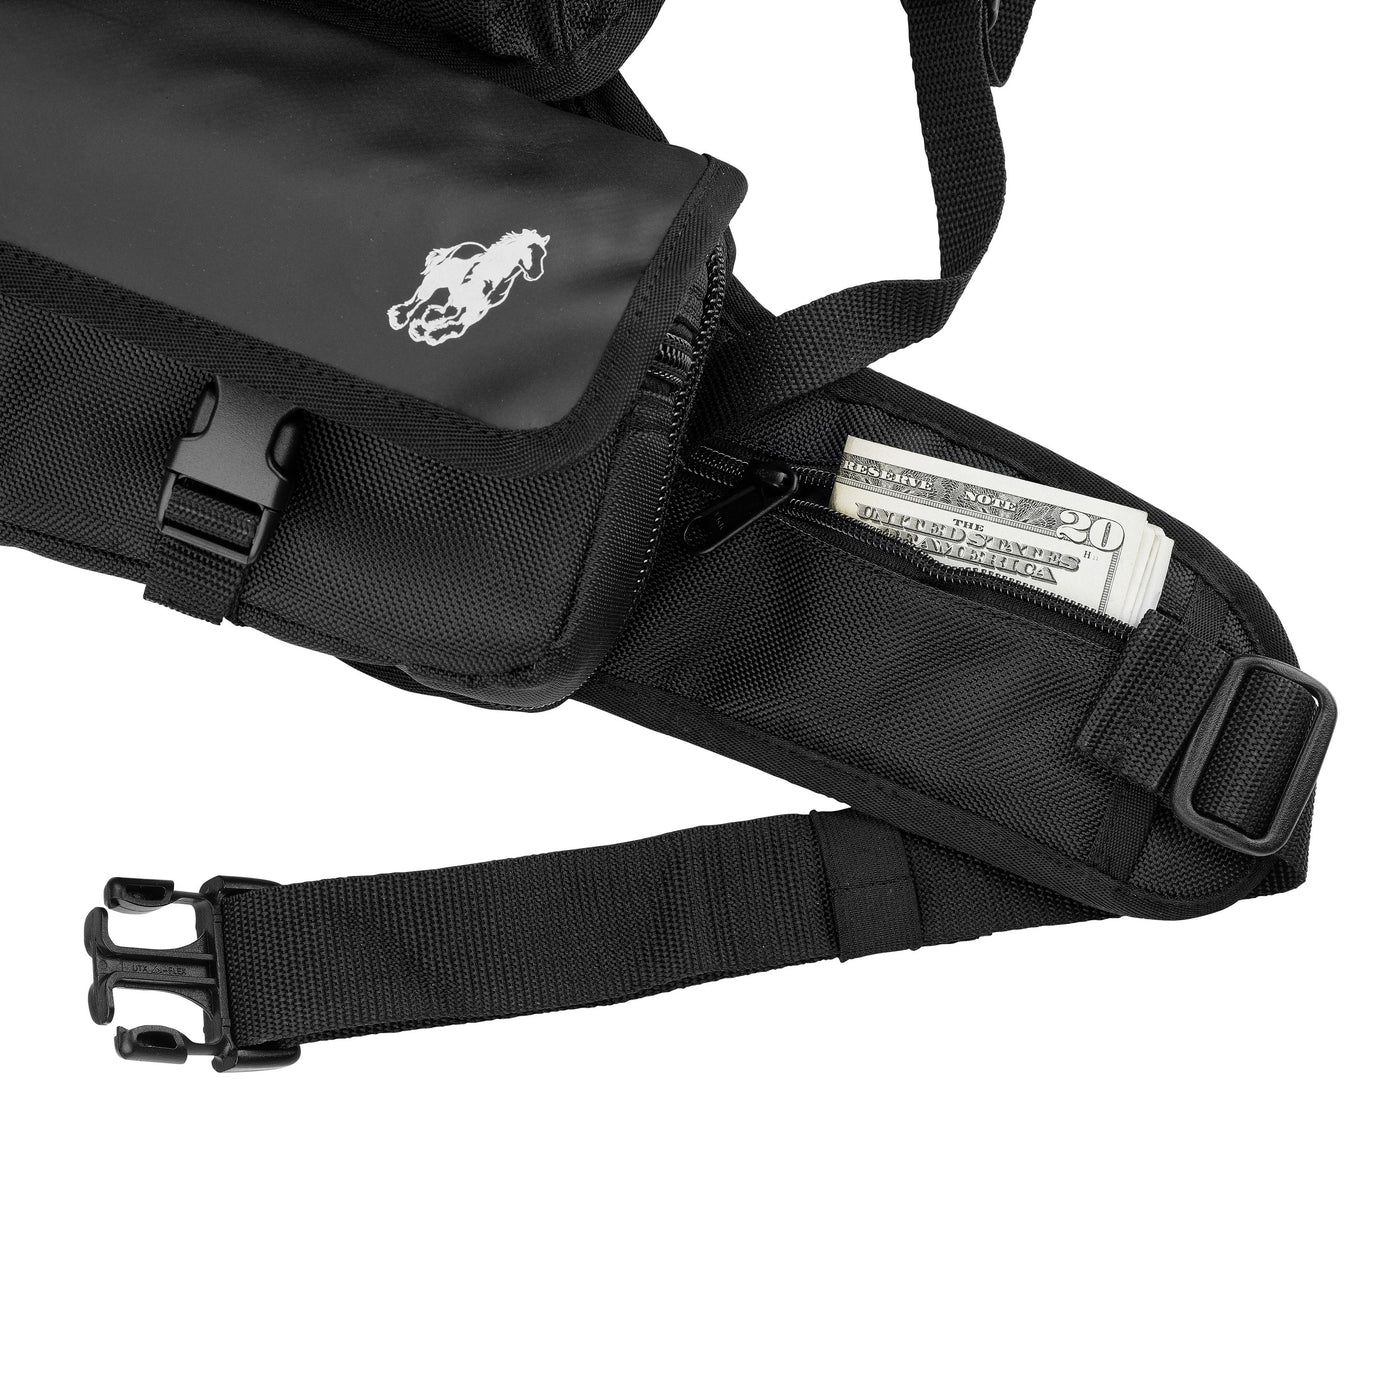 Clydesdale Gear Enduro Pack